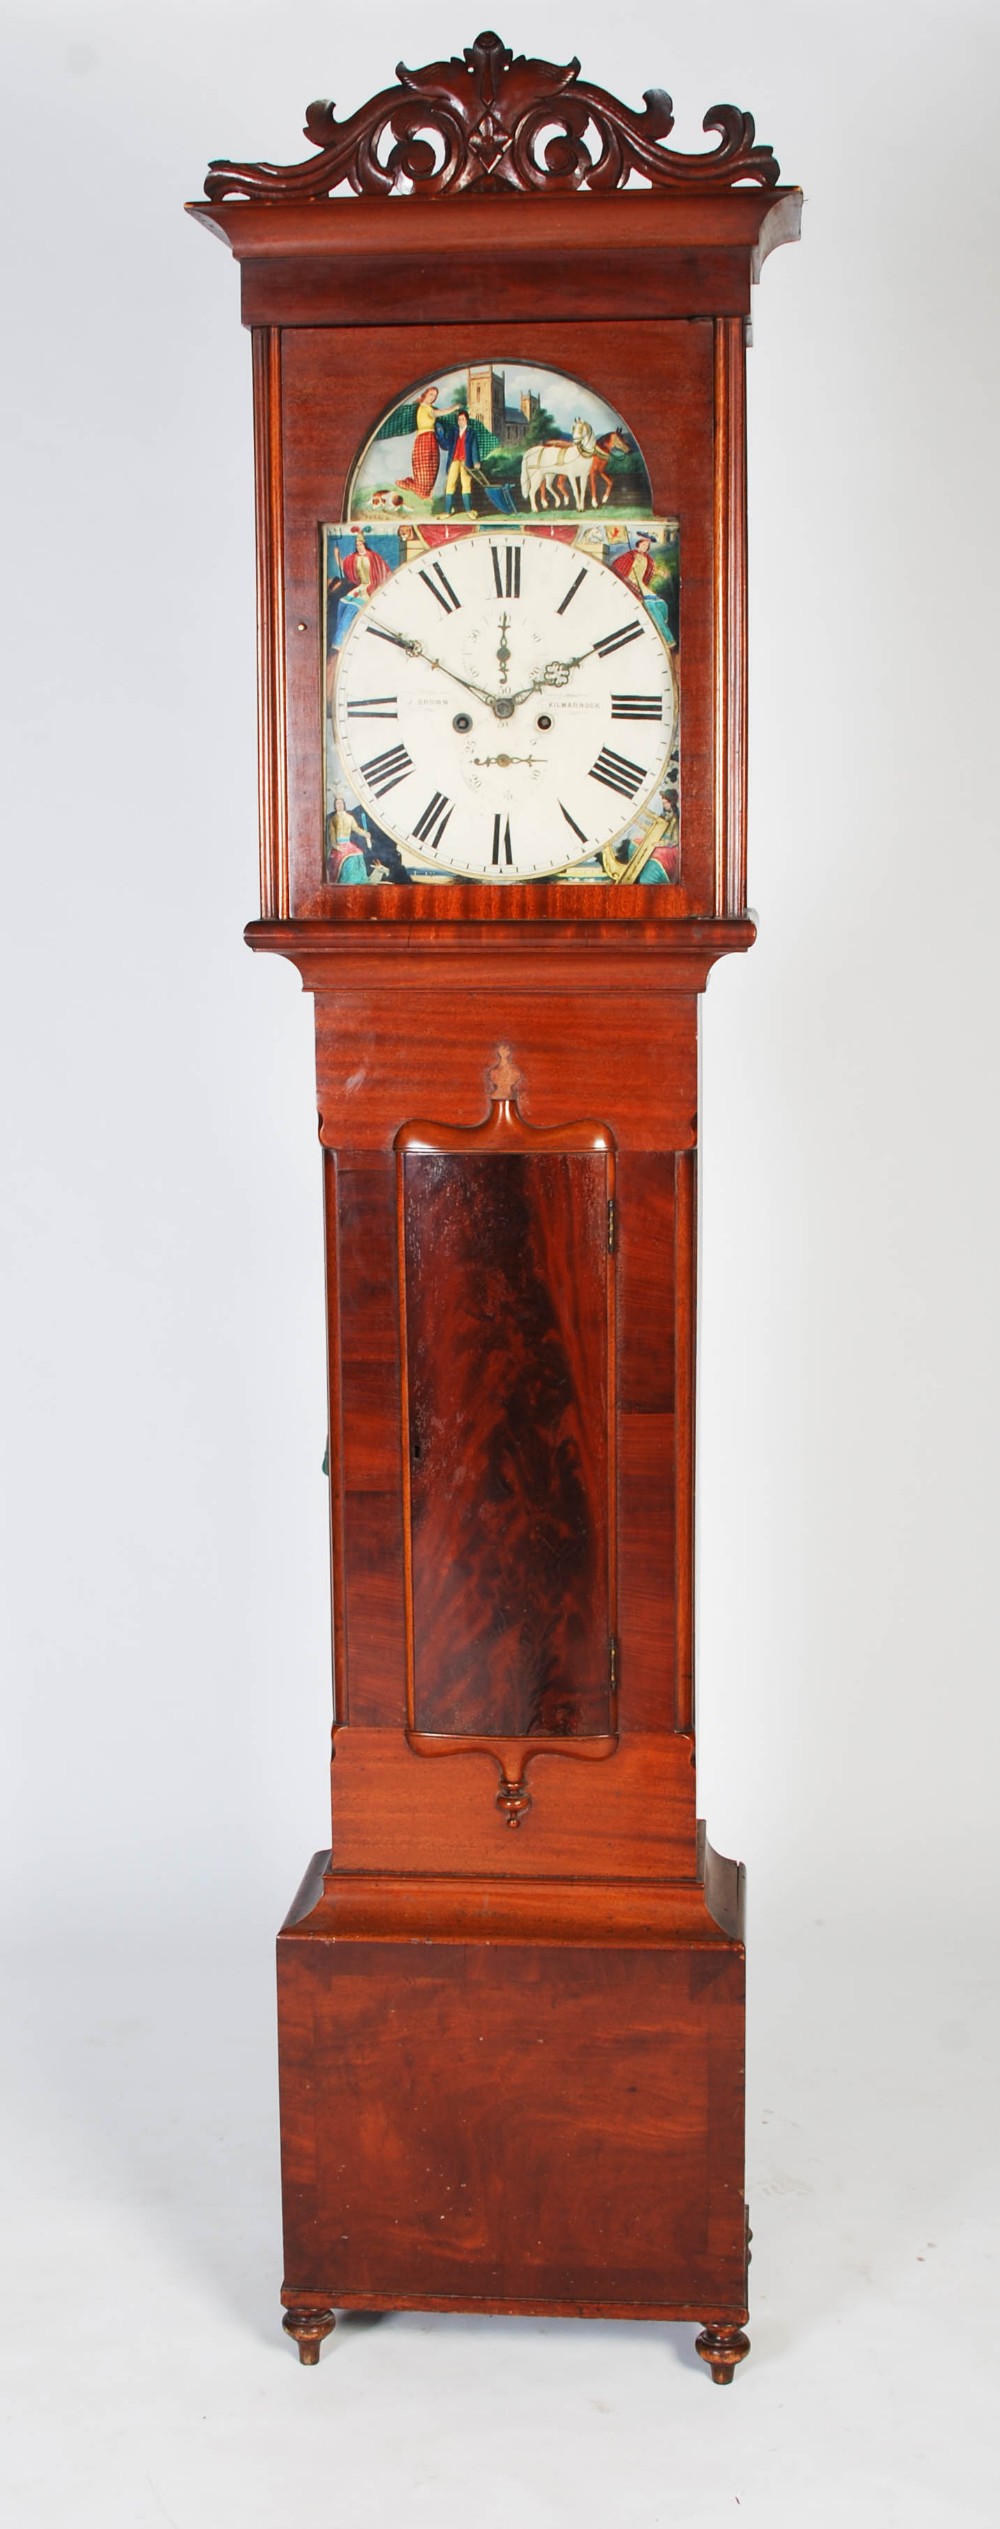 A 19th century Scottish mahogany longcase clock J. Brown, Kilmarnock, the caddy top hood with carved